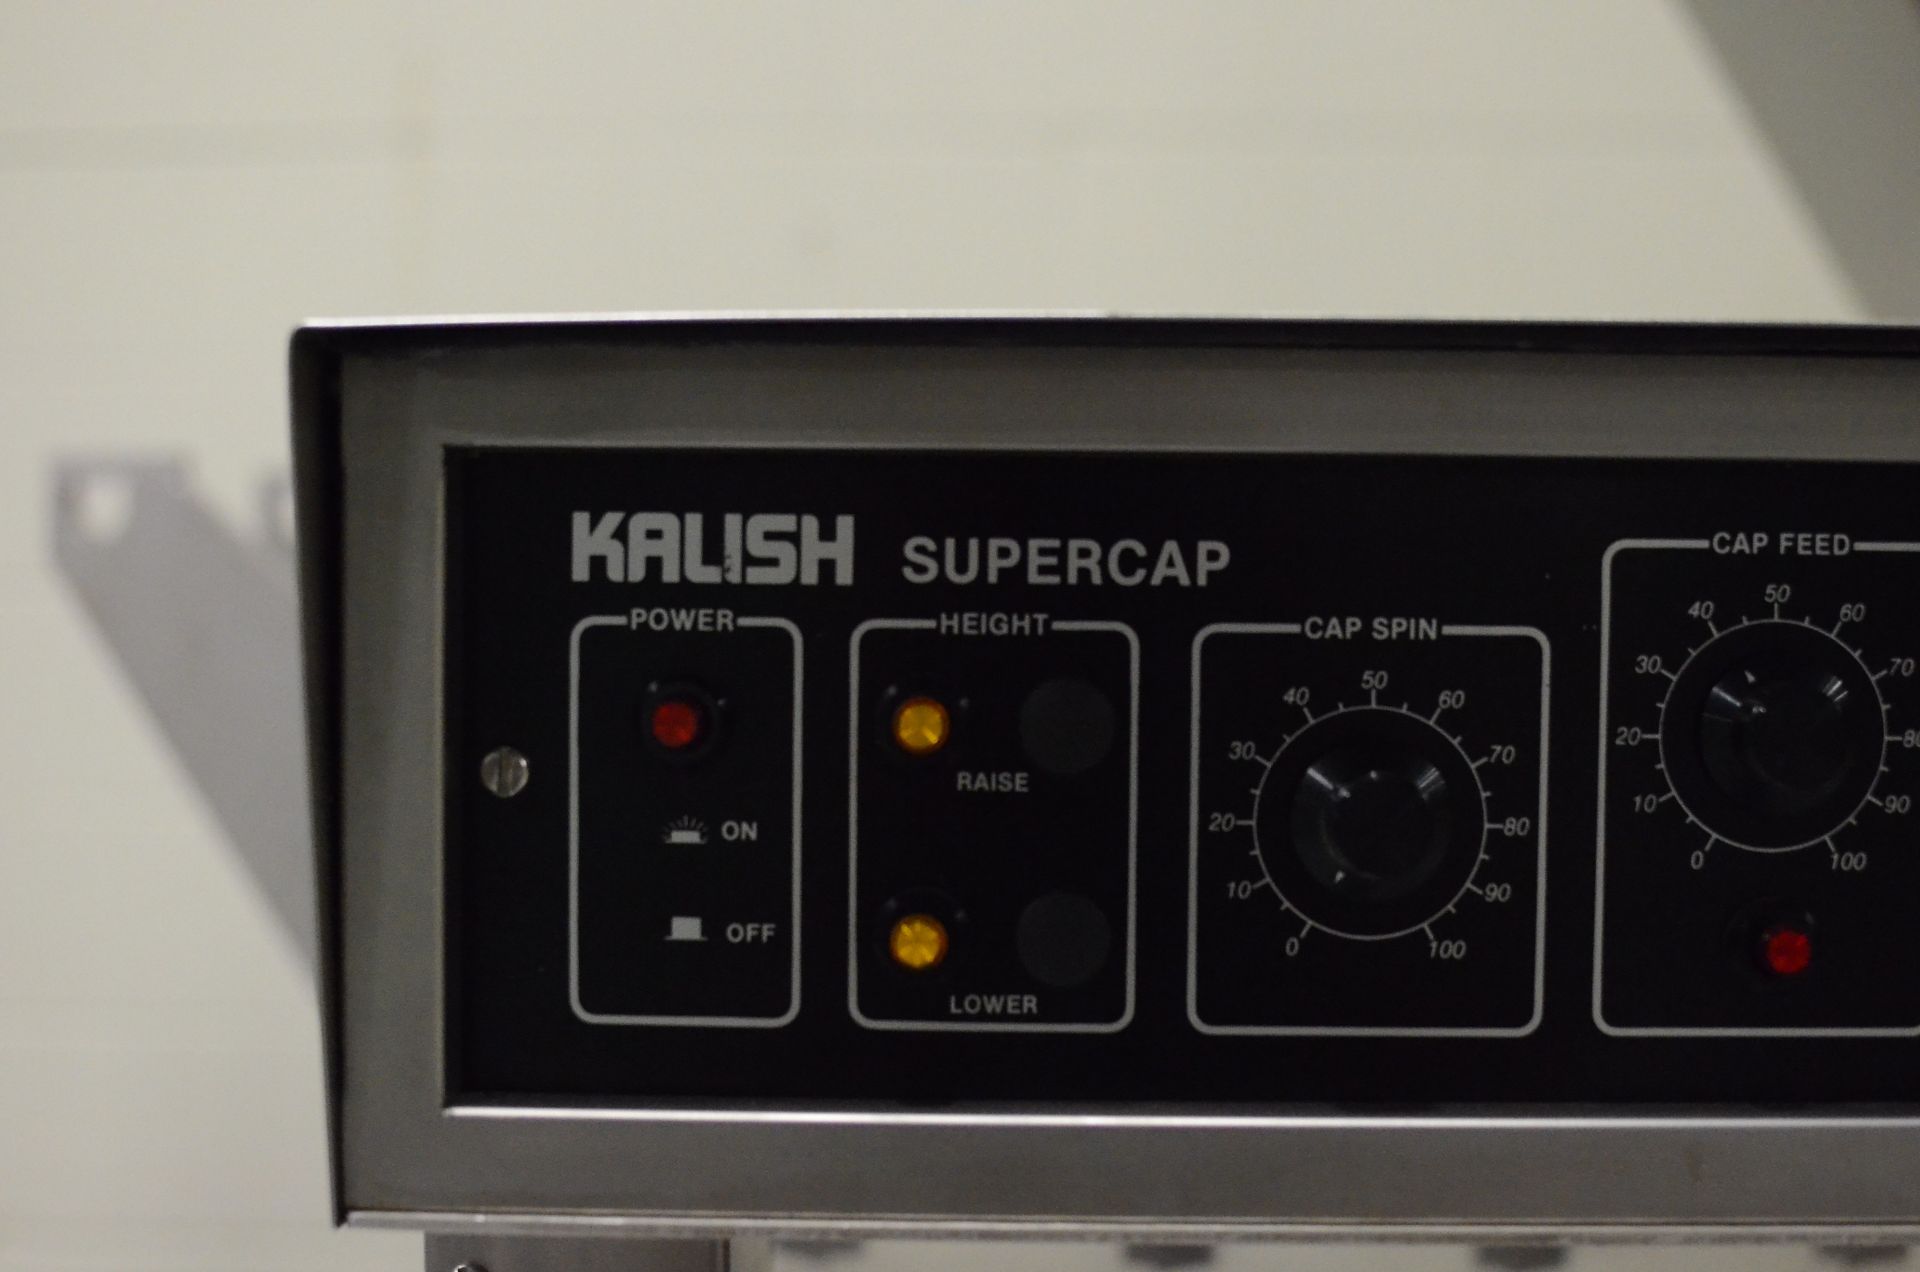 Kalish 5005 SuperCap Capper with Feeder - Image 6 of 7